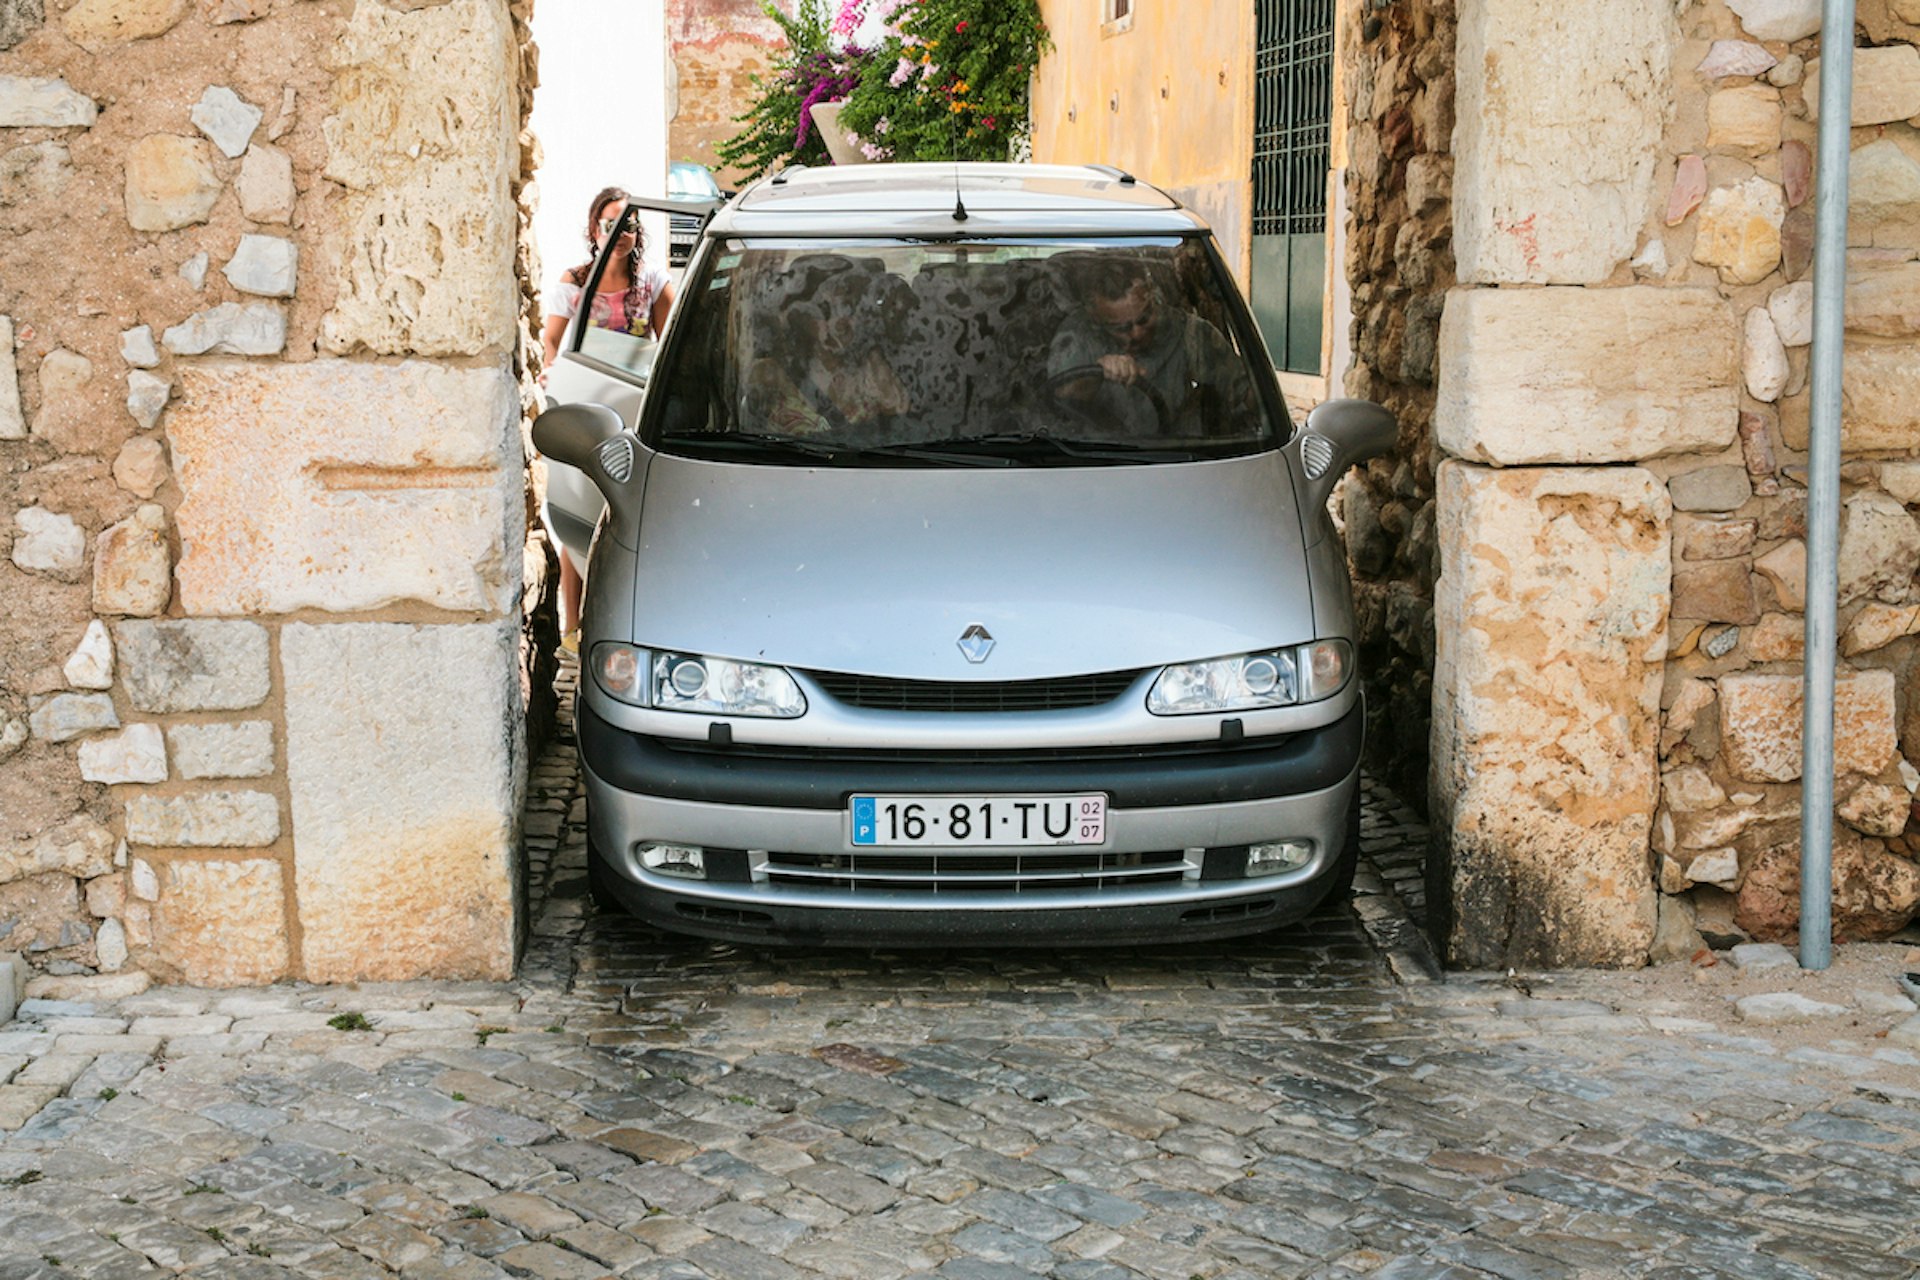 A car is tightly parked in a narrow medieval gateway in the old town of Faro, the Algarve, Portugal